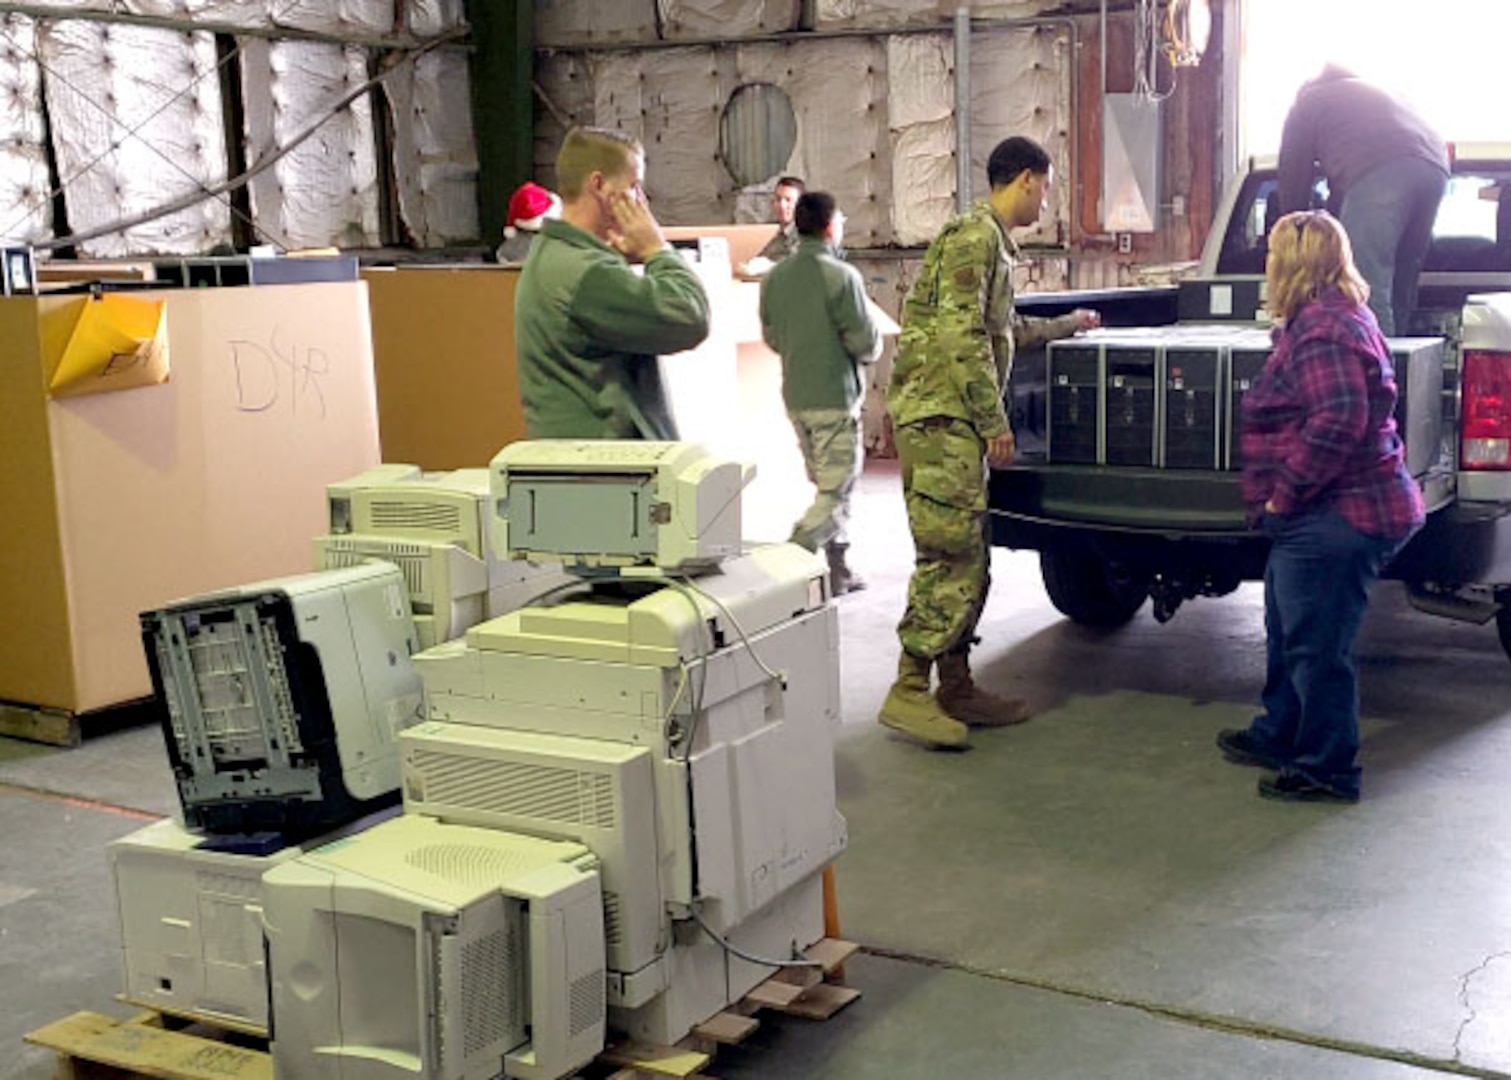 Margaret Jones, an agency rep from the DLA Disposition Services site at Nellis, stands next to the pickup truck’s tailgate as Air force service members unload excess computes for possible use in the Computers For Learning program and recycling.